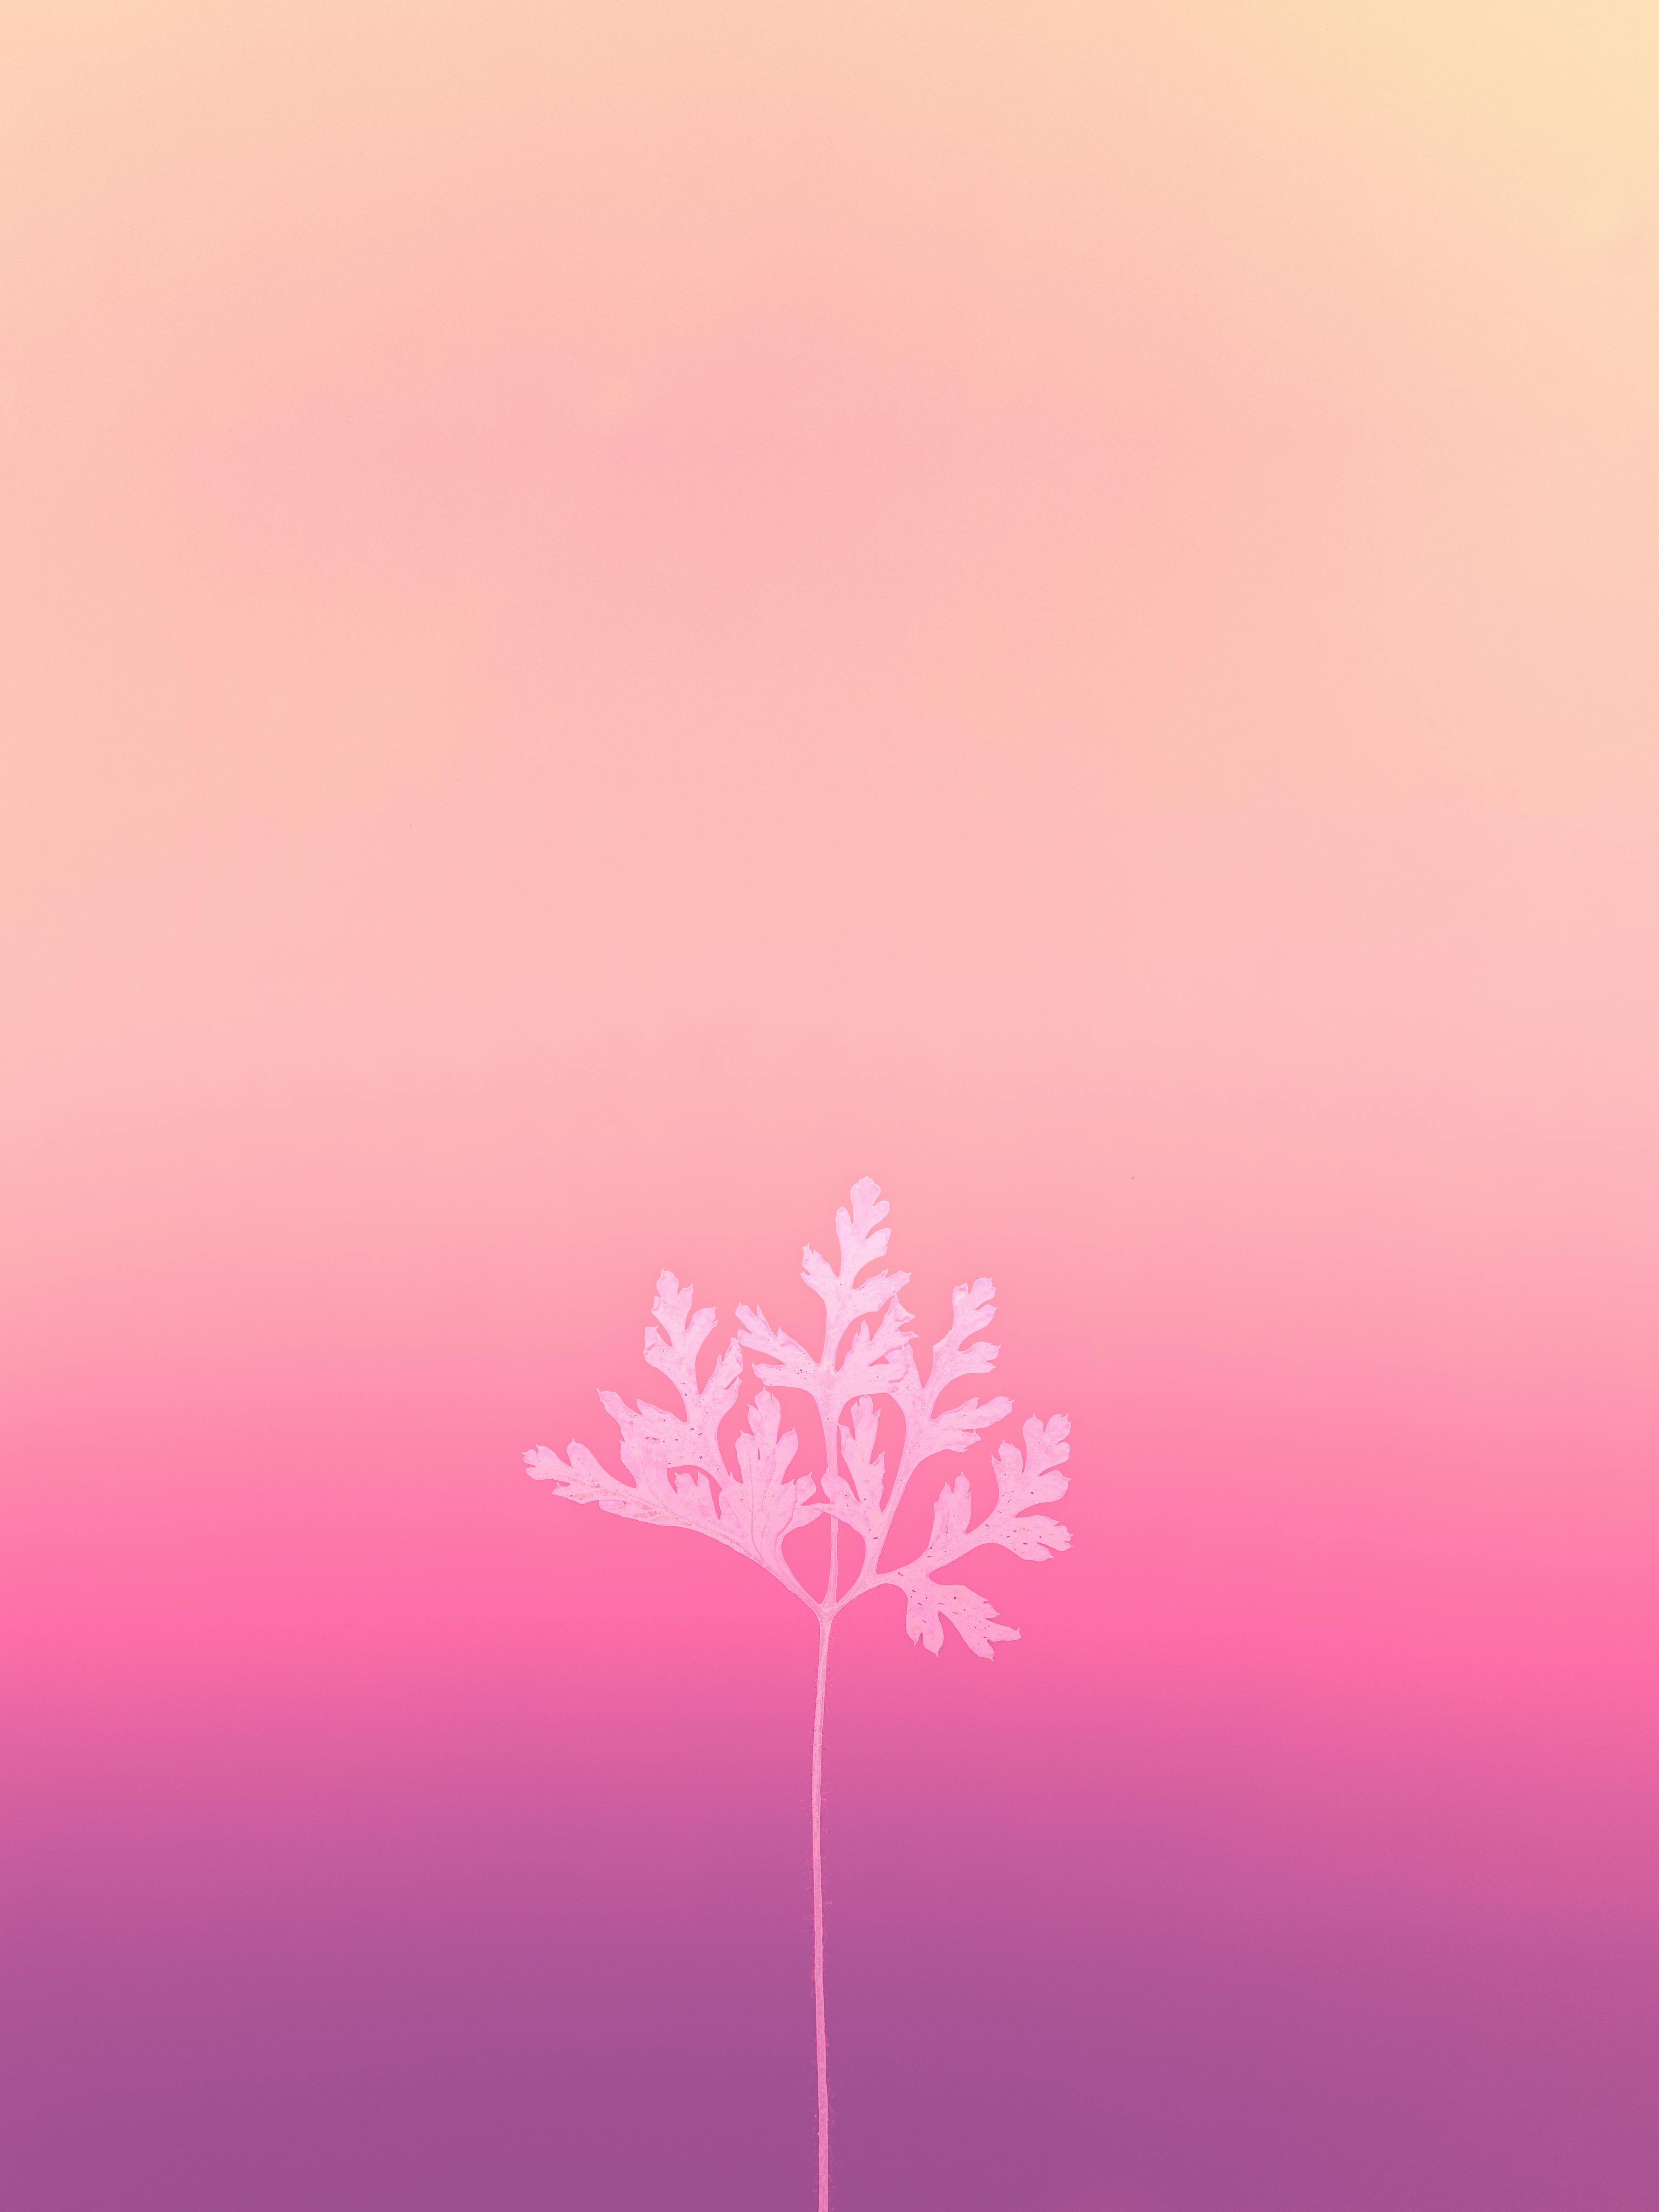 A Pink Gradient Wallpaper · Free Stock Photo